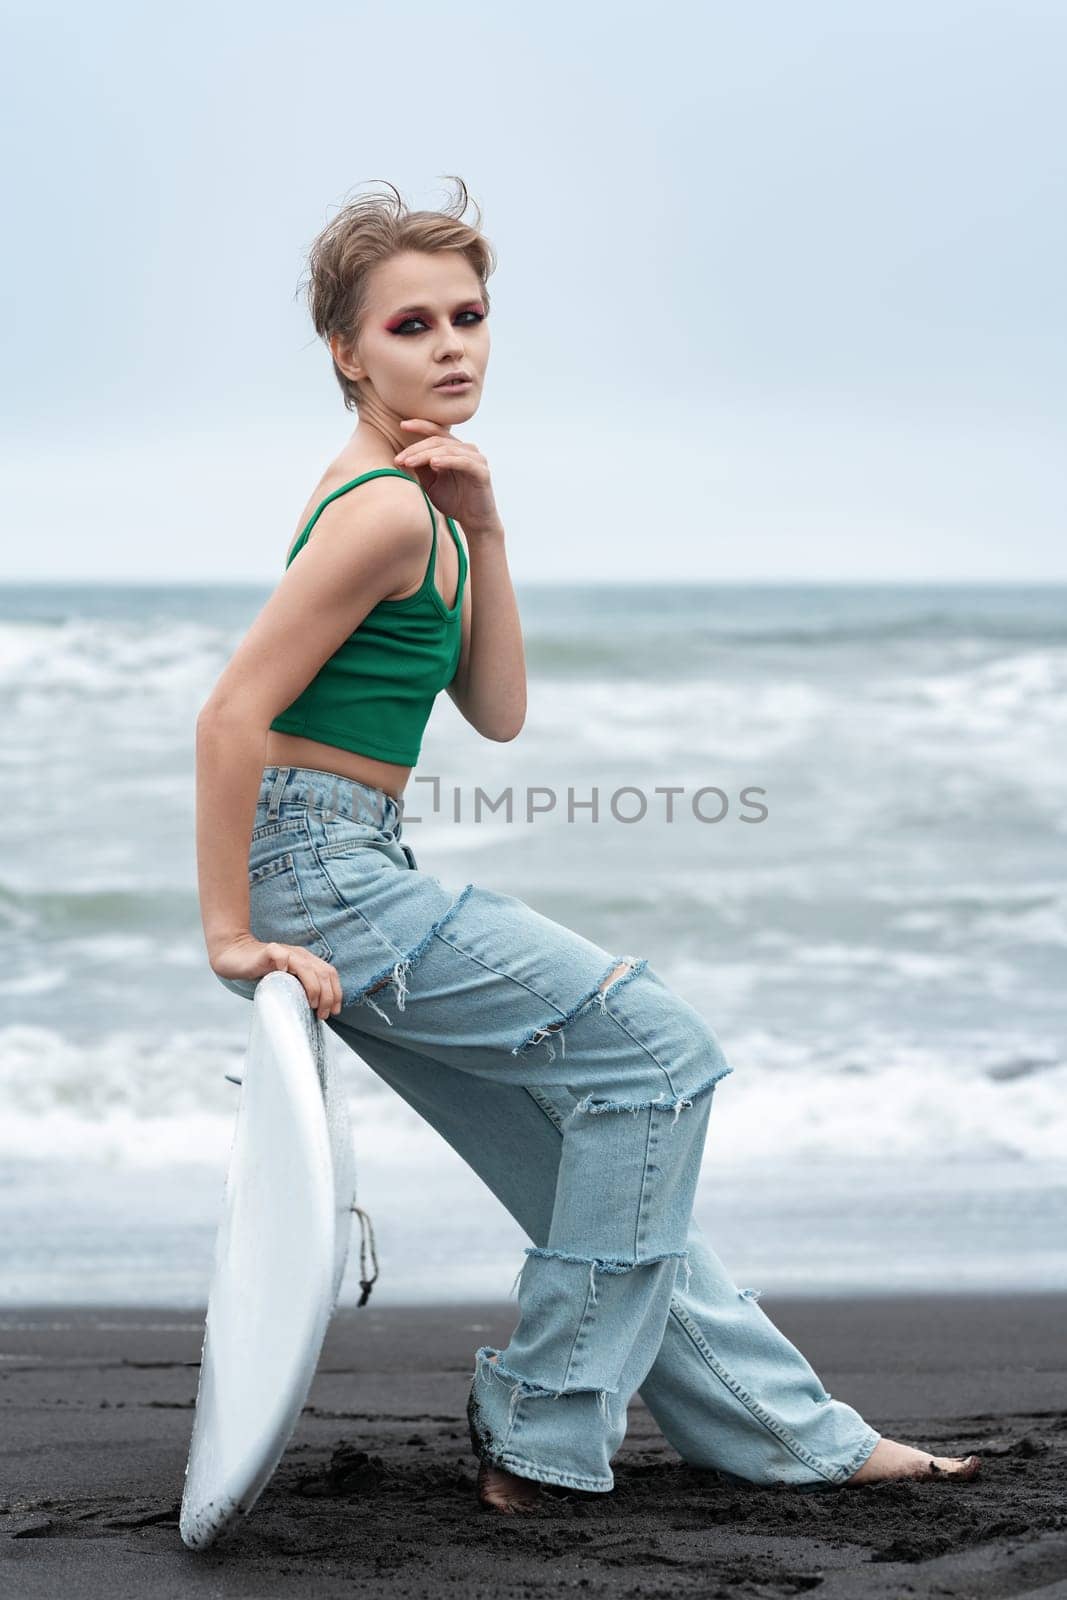 Portrait hipster woman surfer sitting on surf board lying on sand, on background of sea waves. Side view of Caucasian model with short hair and bright makeup looking at camera, wearing top and jeans